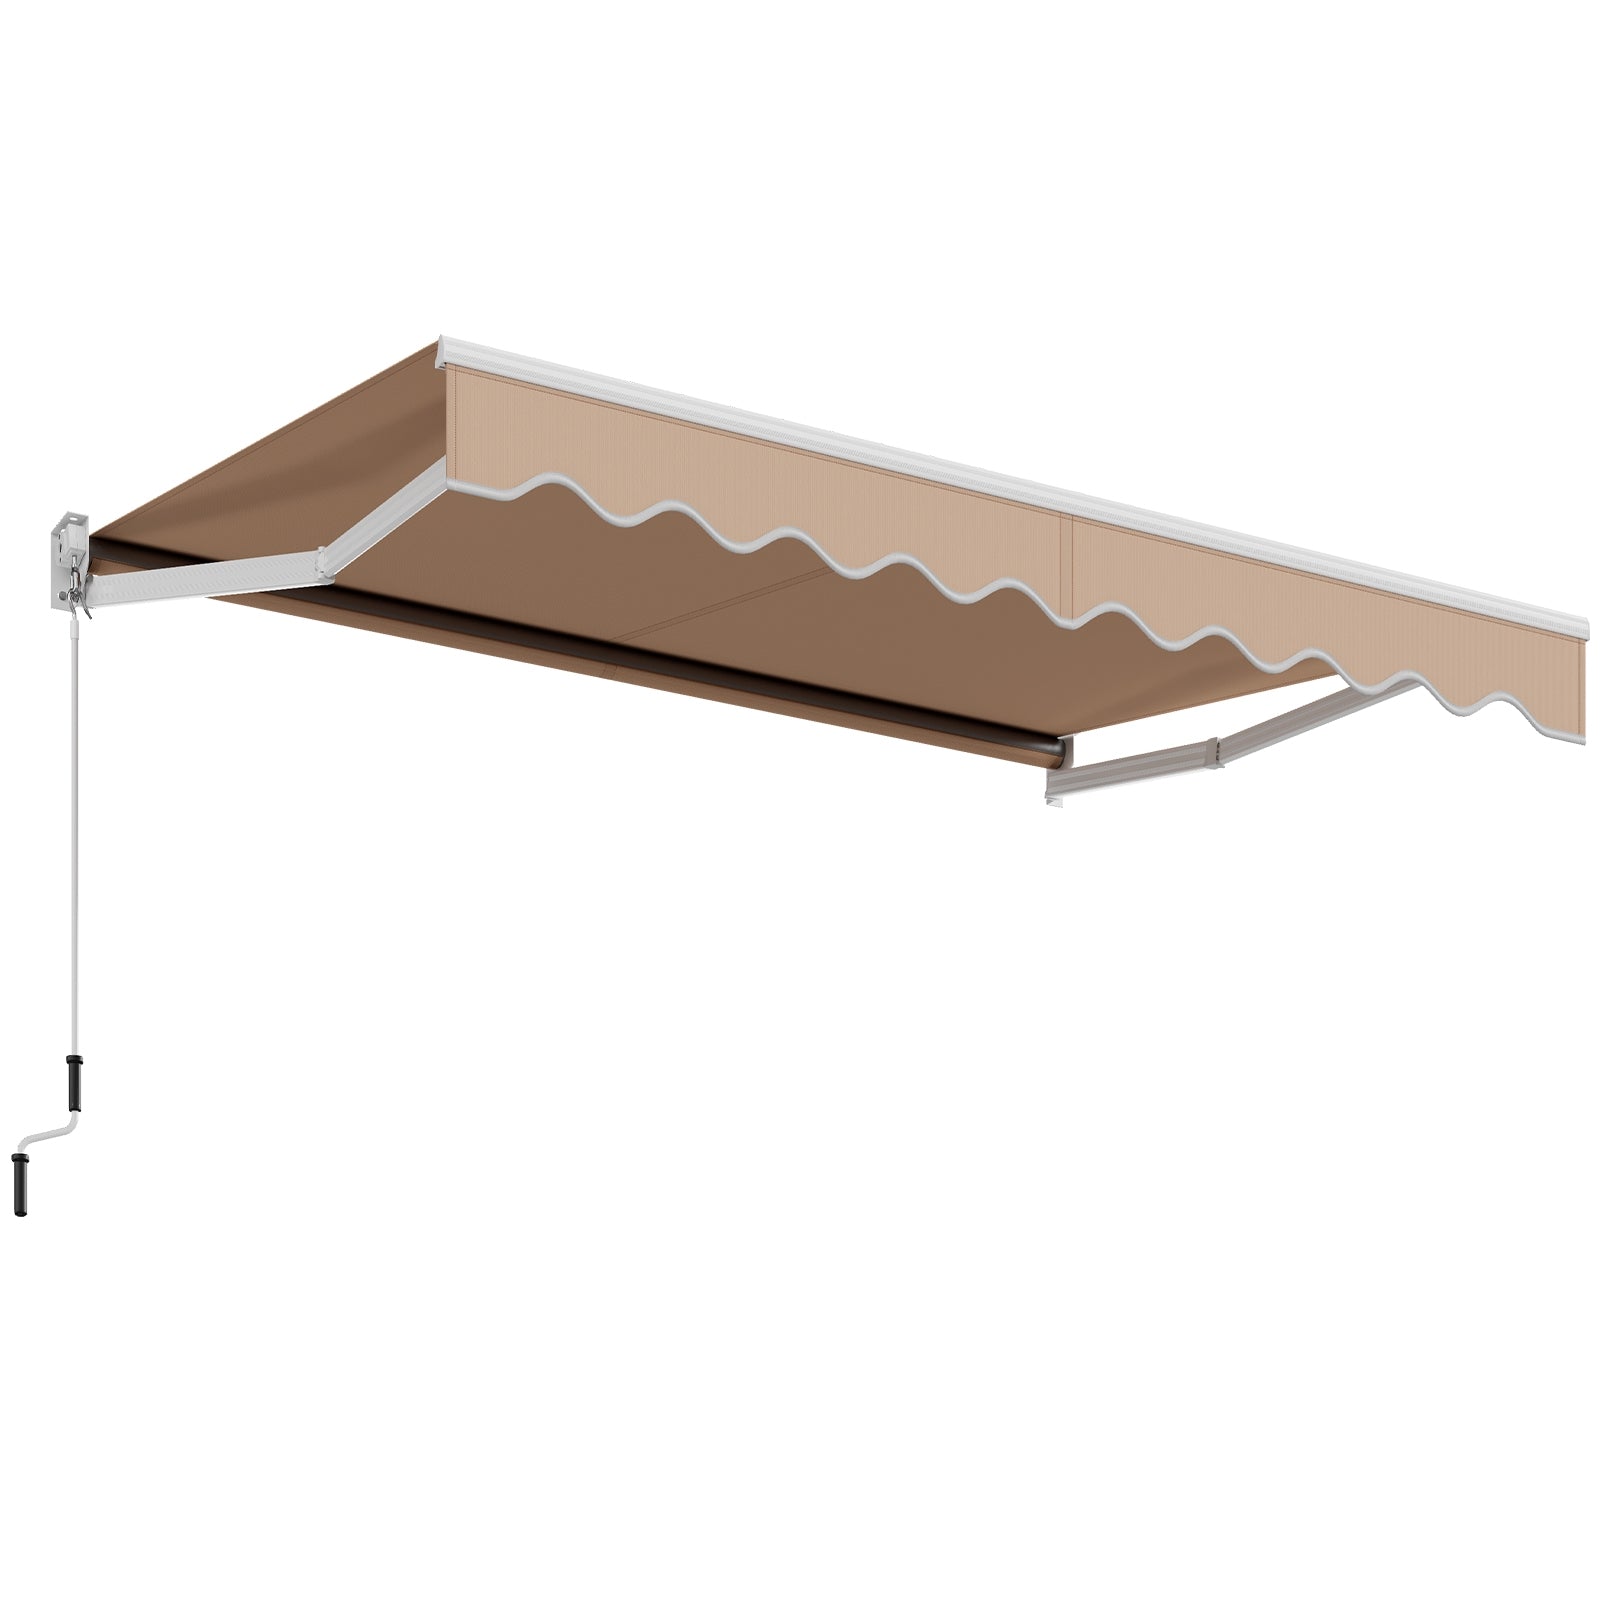 8 x 6.6 Feet Patio Retractable Awning for Balcony with Manual Crank Handle